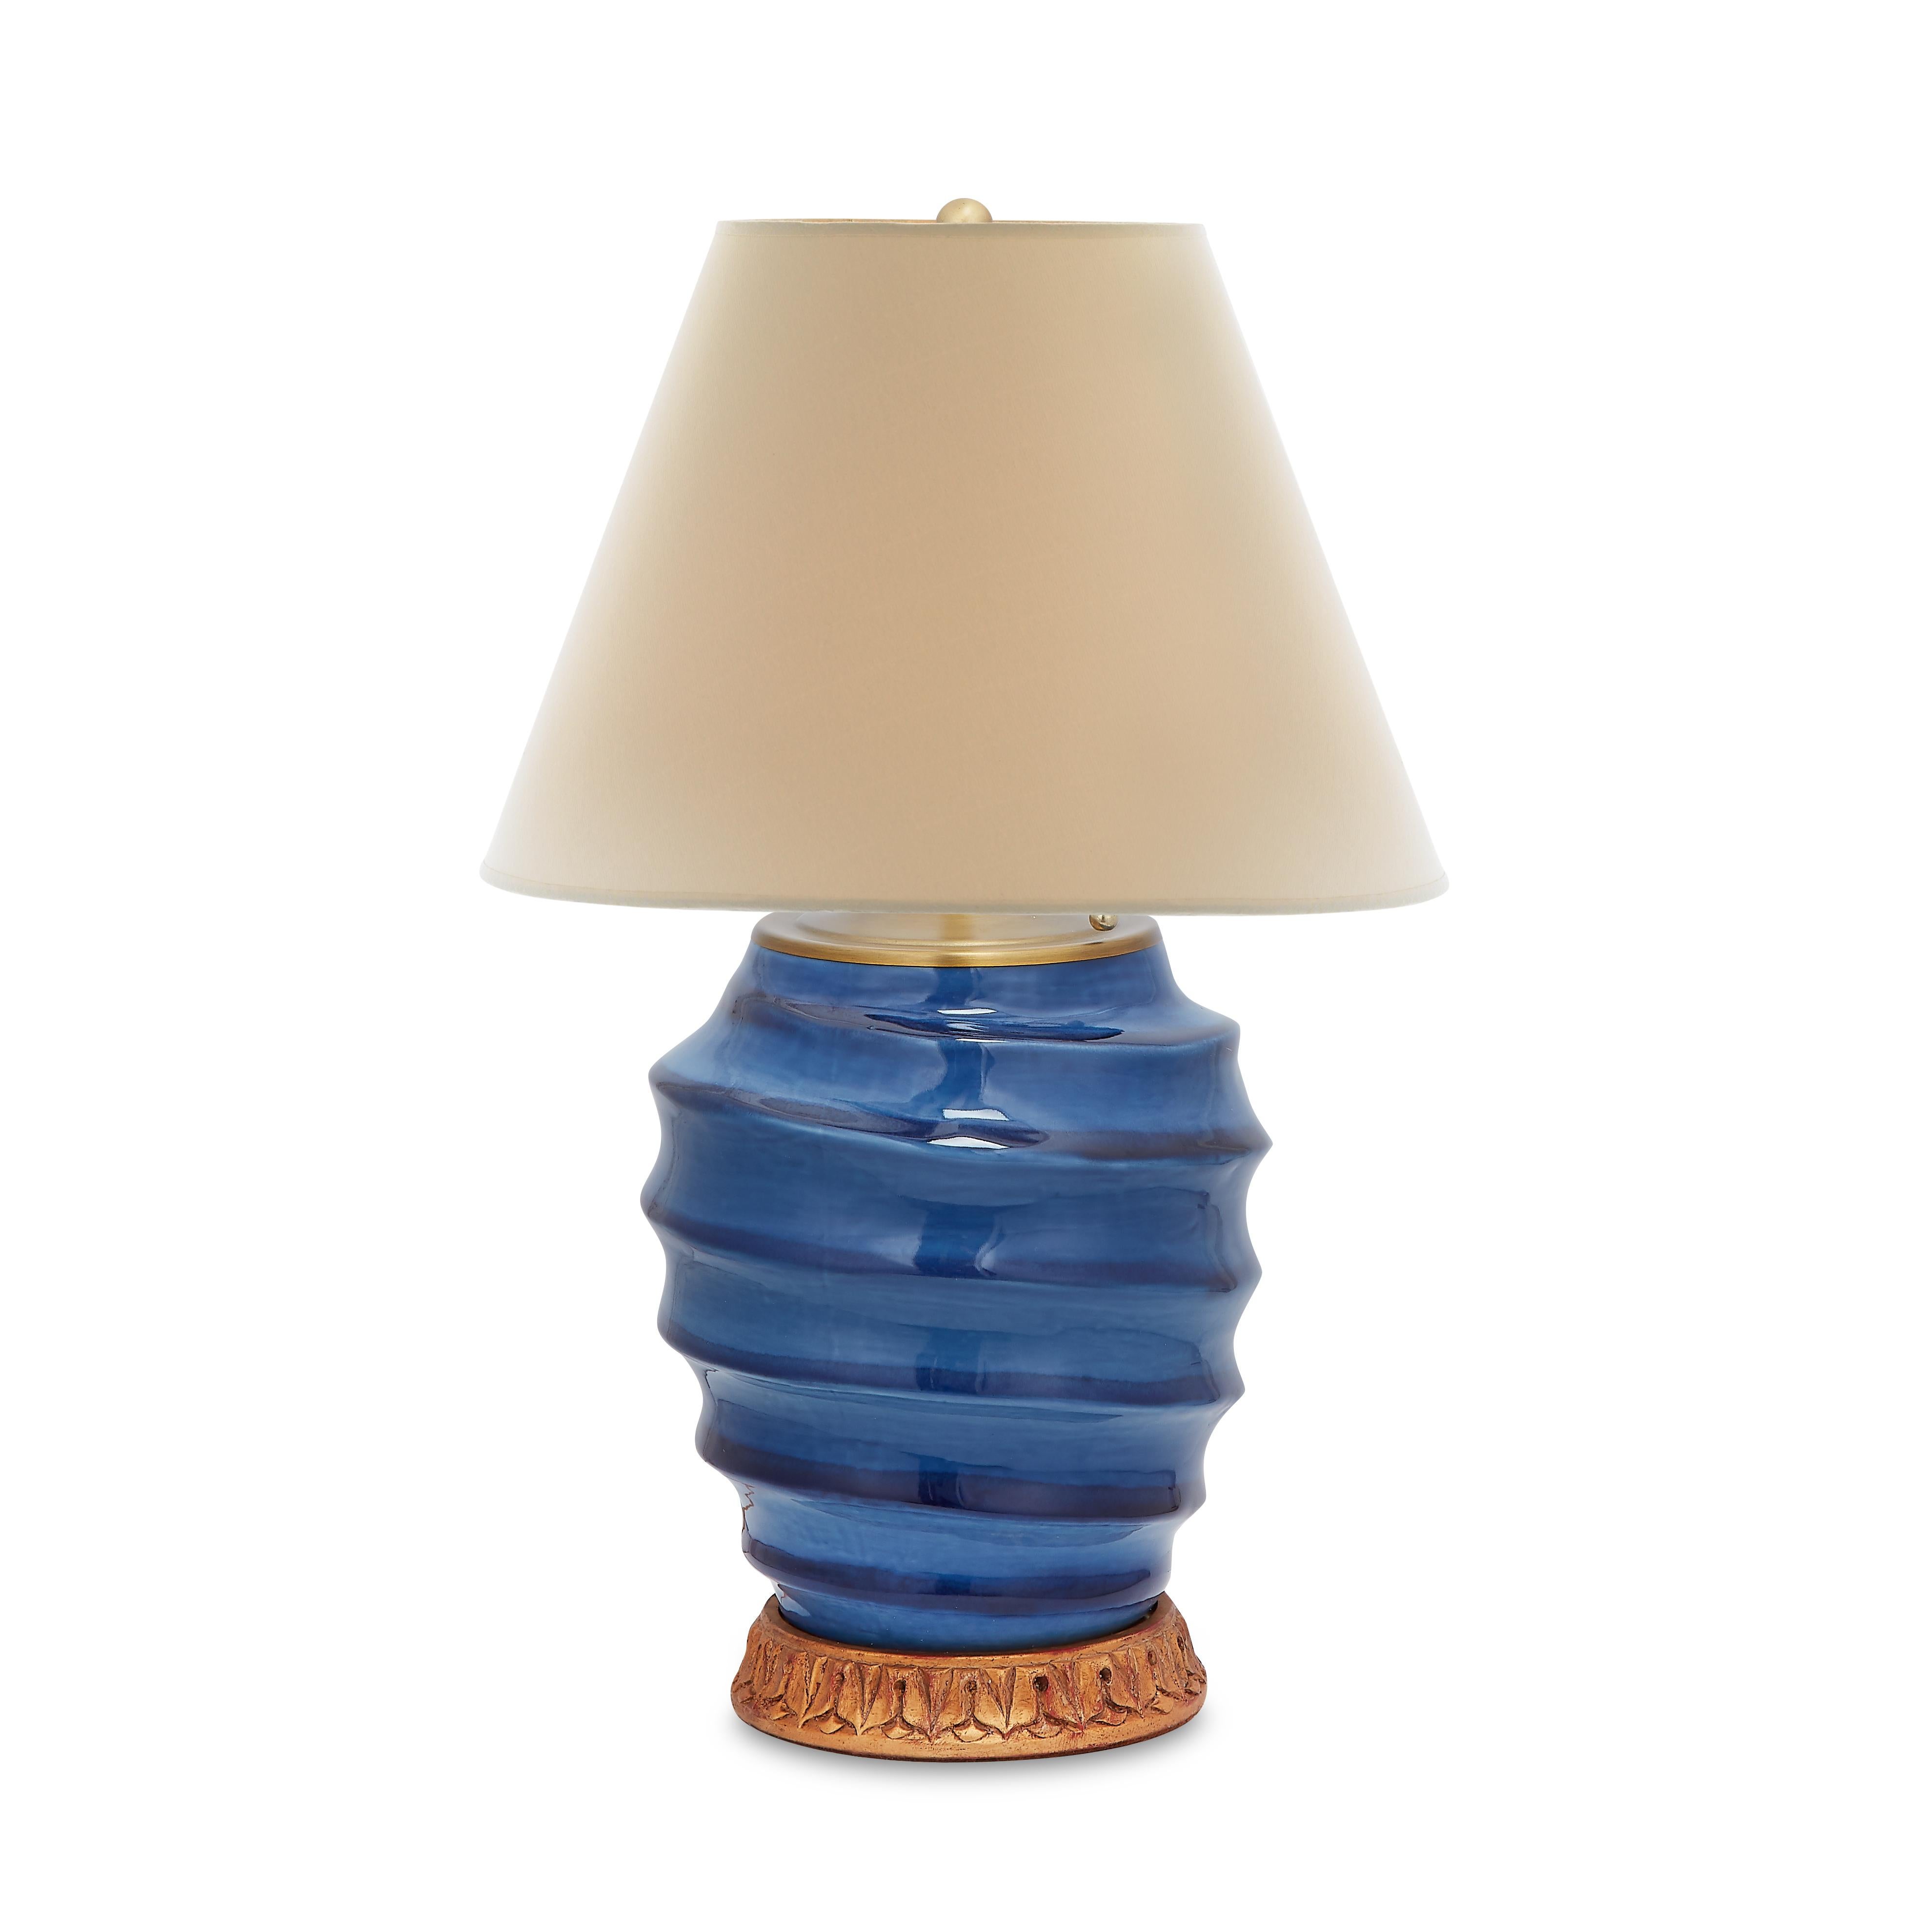 A striking geometric spiral highlights the dark and light notes of the cheerful Atlantic blue glaze, the namesake of this well proportioned lamp. Set atop a gilded gold base.